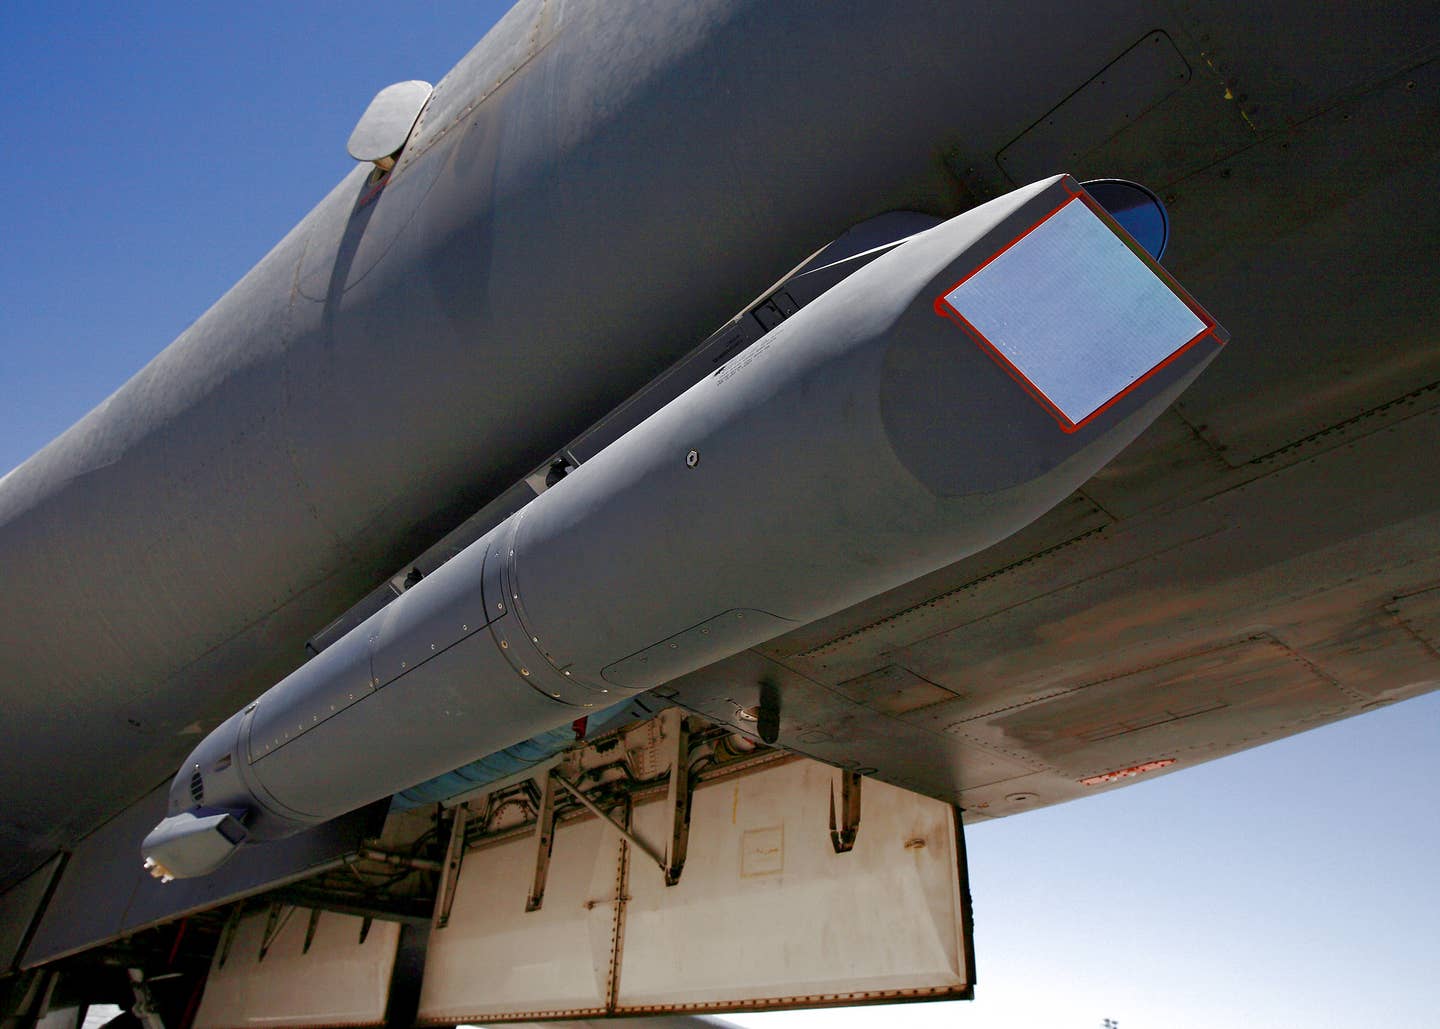 A sniper pod is mounted on the lower right of a B-1B Lancer fuselage. The sniper pod allows the aircrew to positively identify a target and quickly assess battle damage after an attack. (U.S. Air Force photo/Jet Fabara)